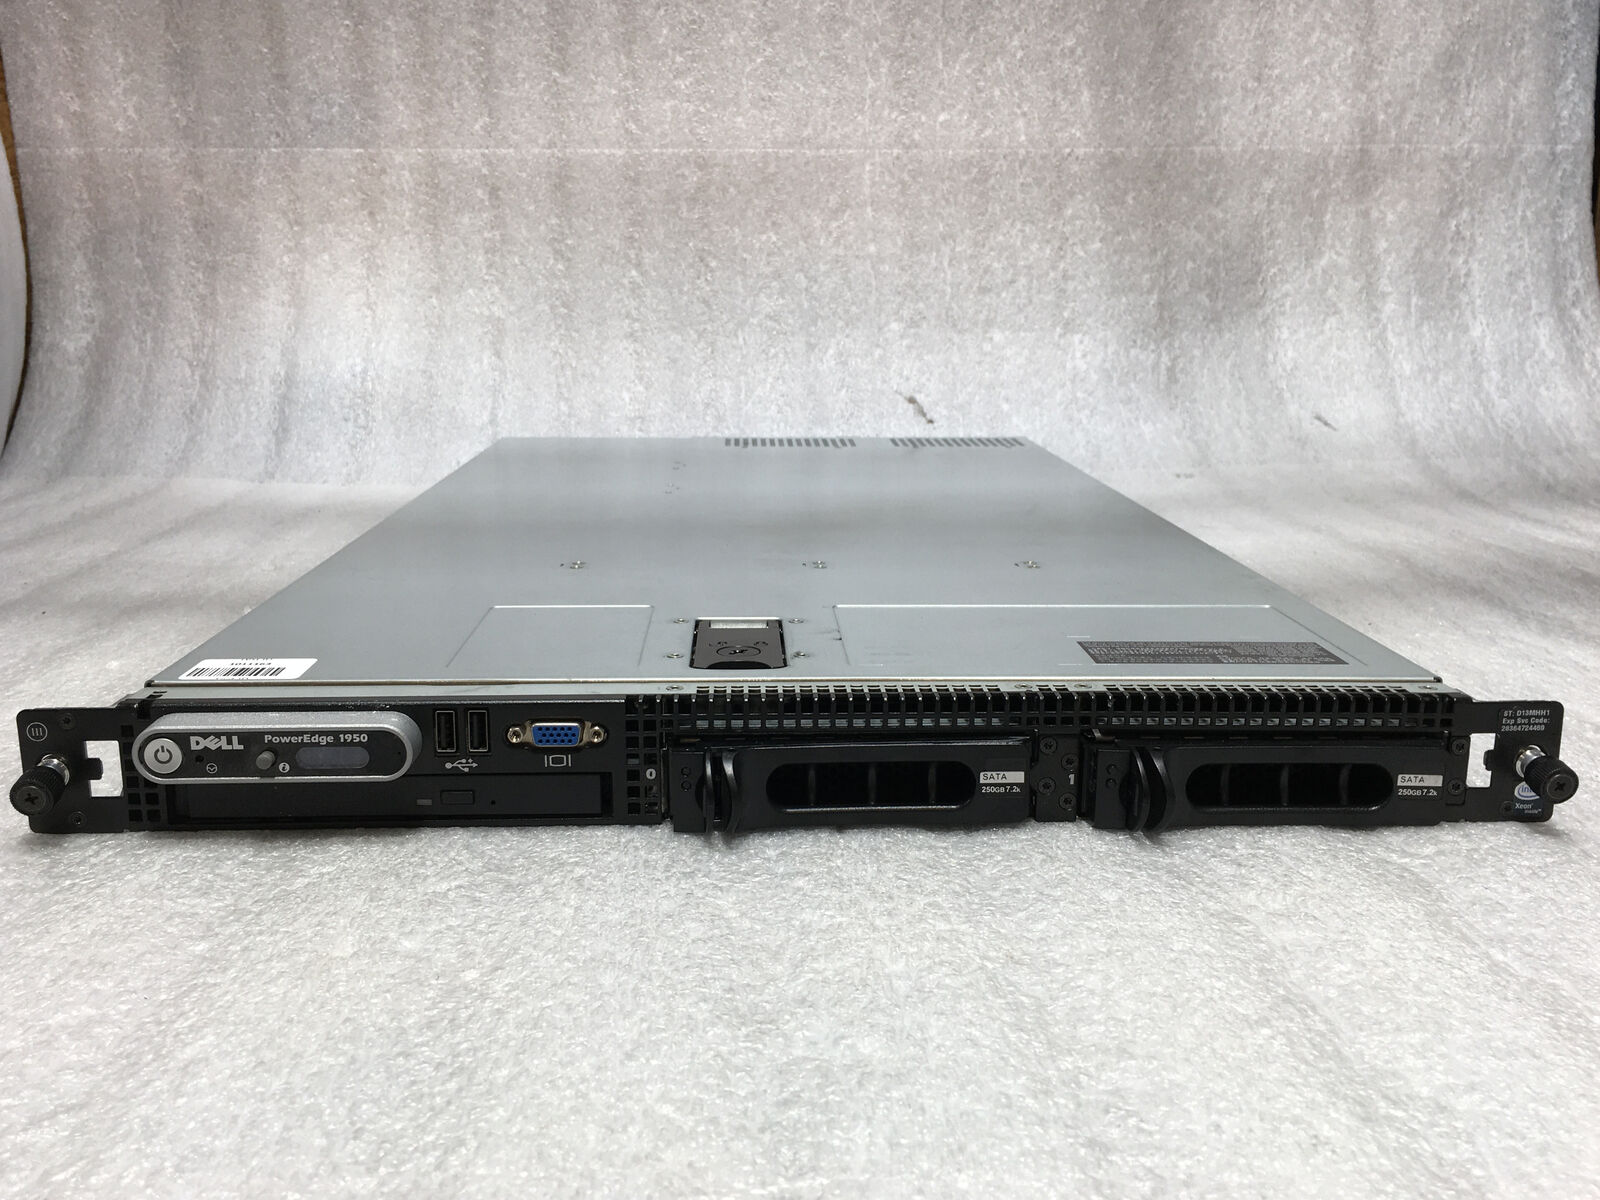 Dell PowerEdge 1950 EMU01 Xeon Rack Blade Server, Good Condition HDD Removed